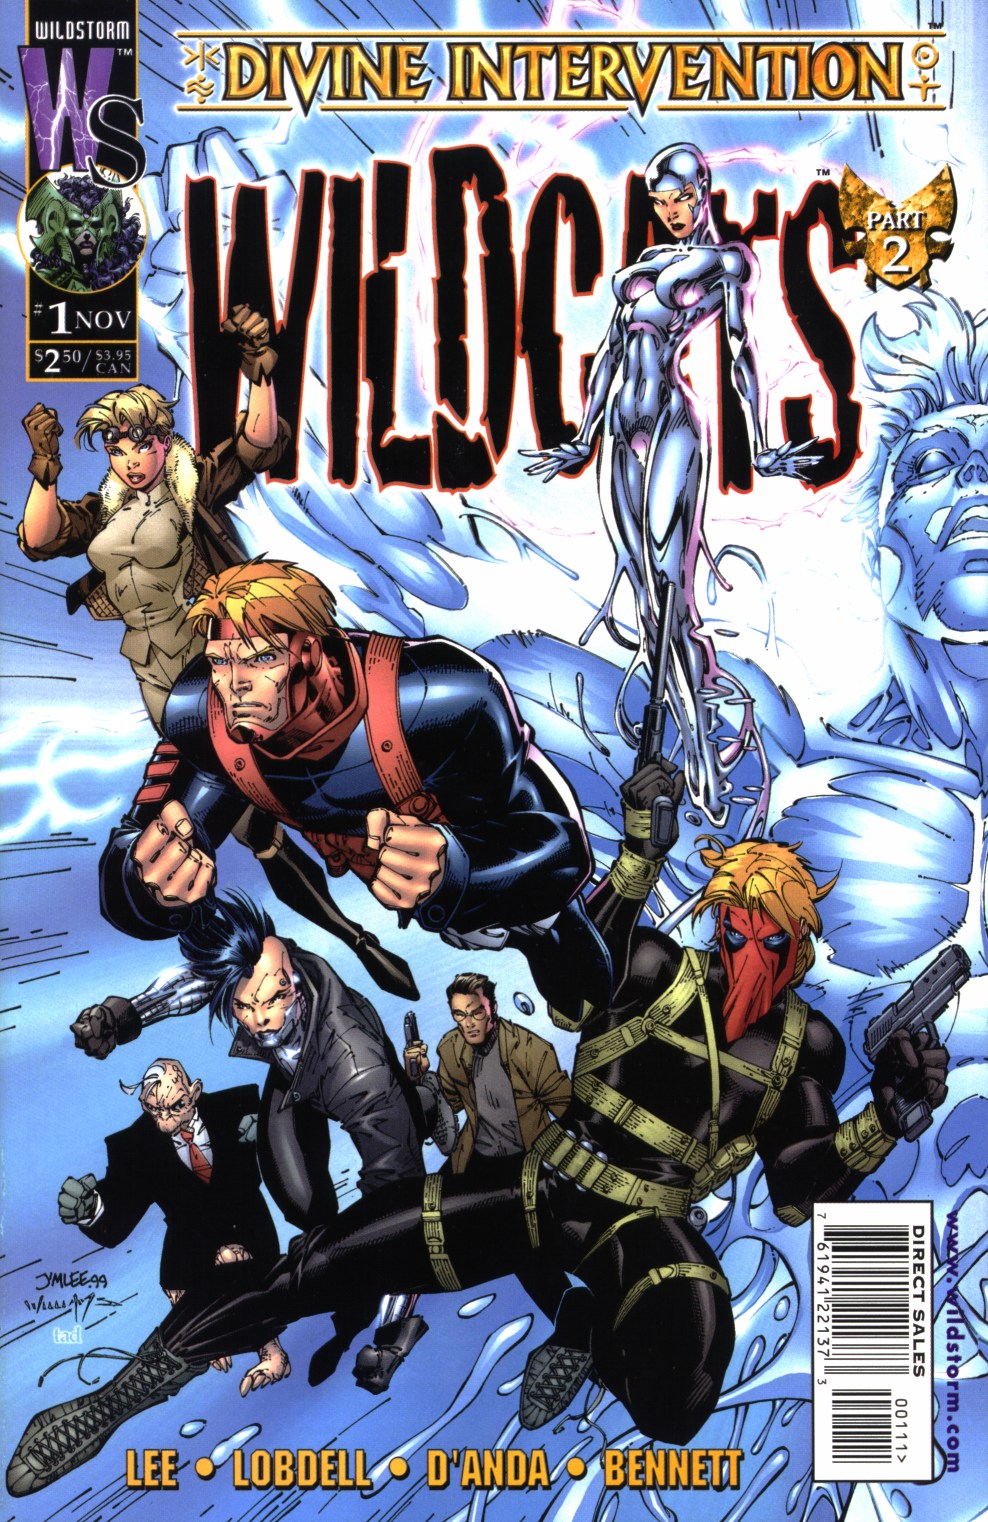 Read online Wildcats: Divine Intervention comic -  Issue # Full - 1